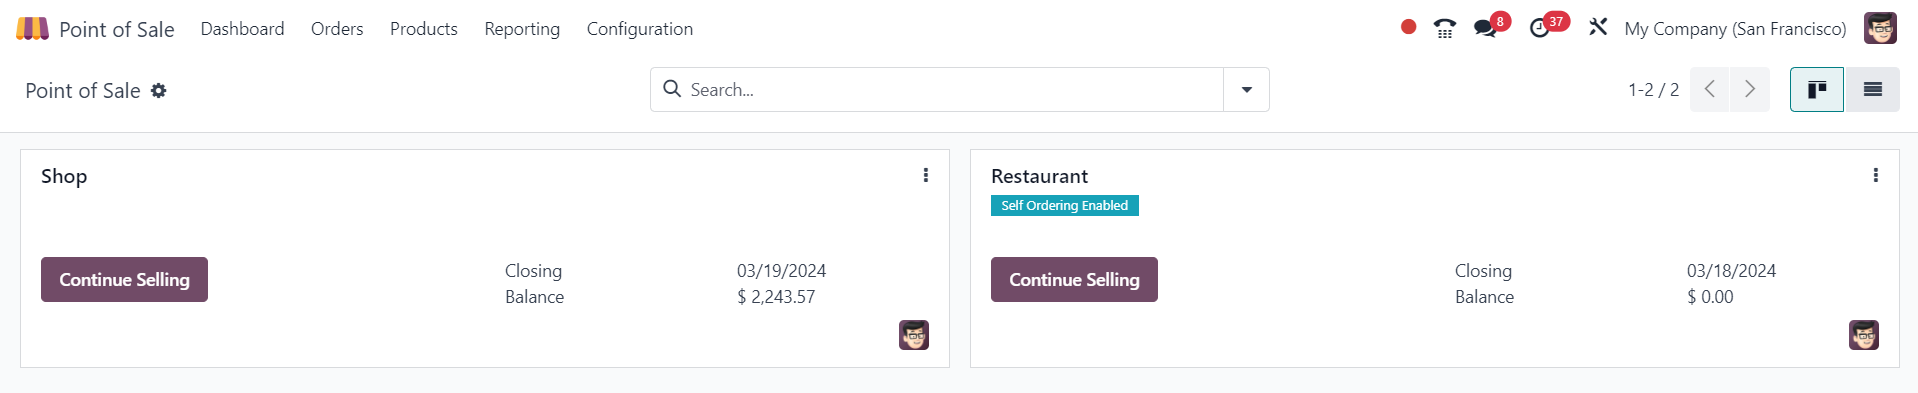 Creating a New Order in Odoo 17 PoS